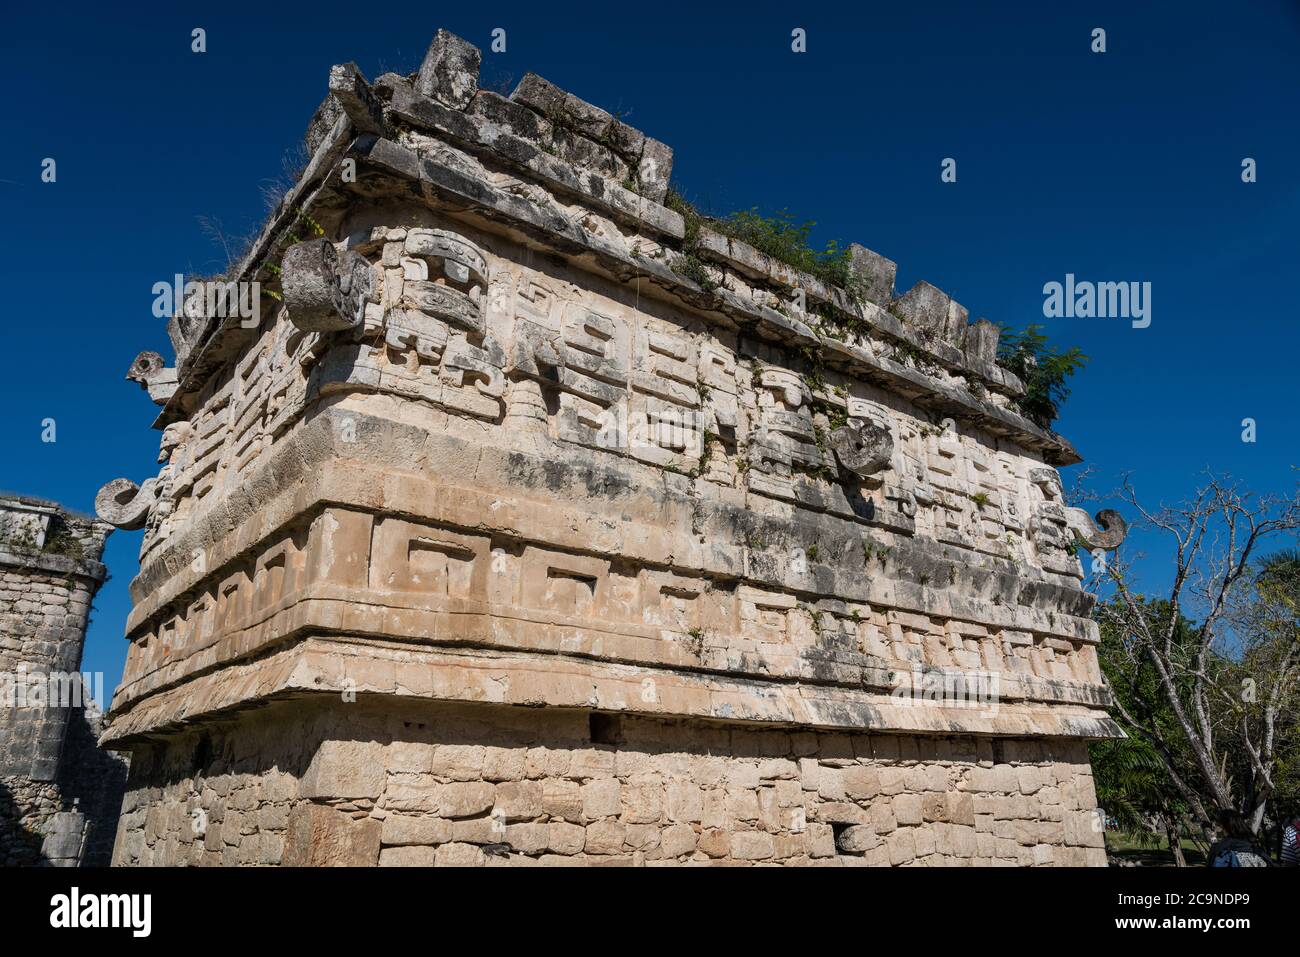 The Iglesia or the Church in the the Nunnery Complex in the ruins of the great  Mayan city of Chichen Itza, Yucatan, Mexico.  Built in the Puuc style. Stock Photo